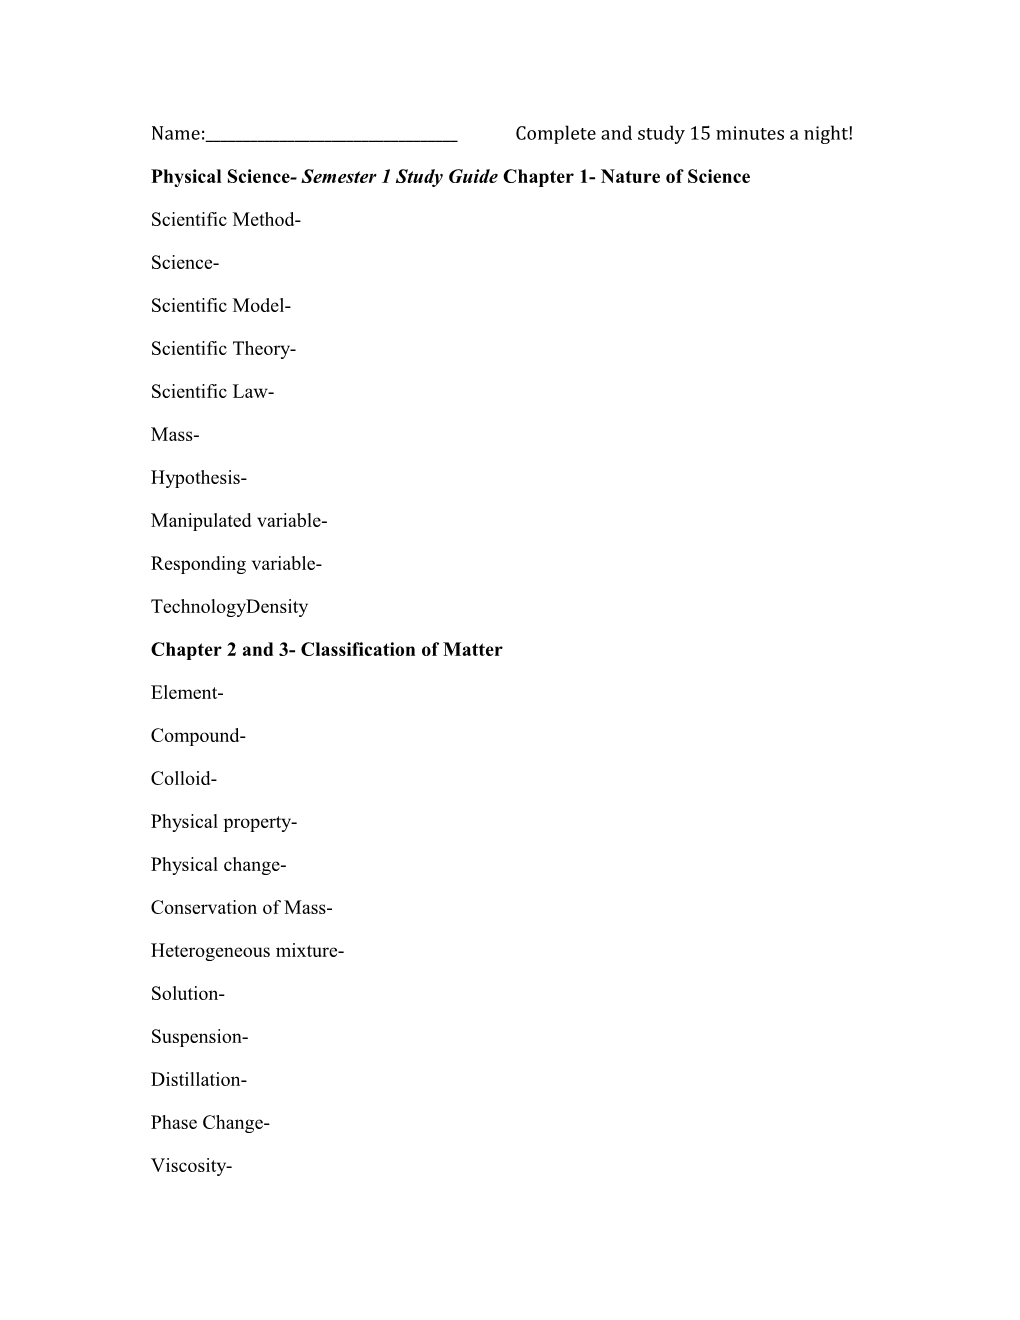 Physical Science- Semester 1 Study Guide Chapter 1- Nature of Science